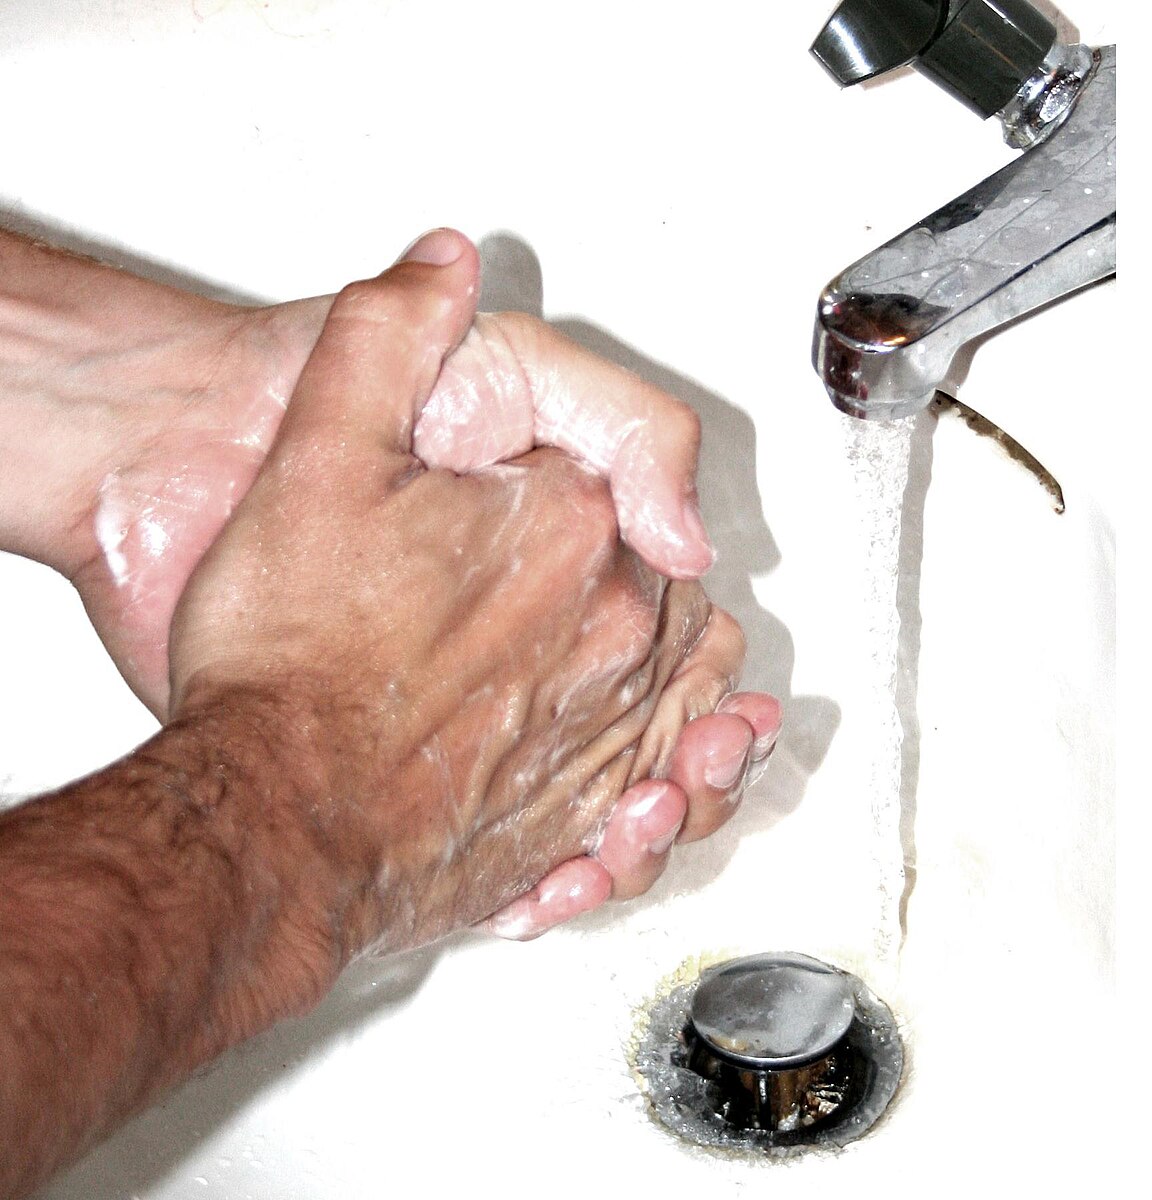 Photo: Washing one's hands, a form of hygiene